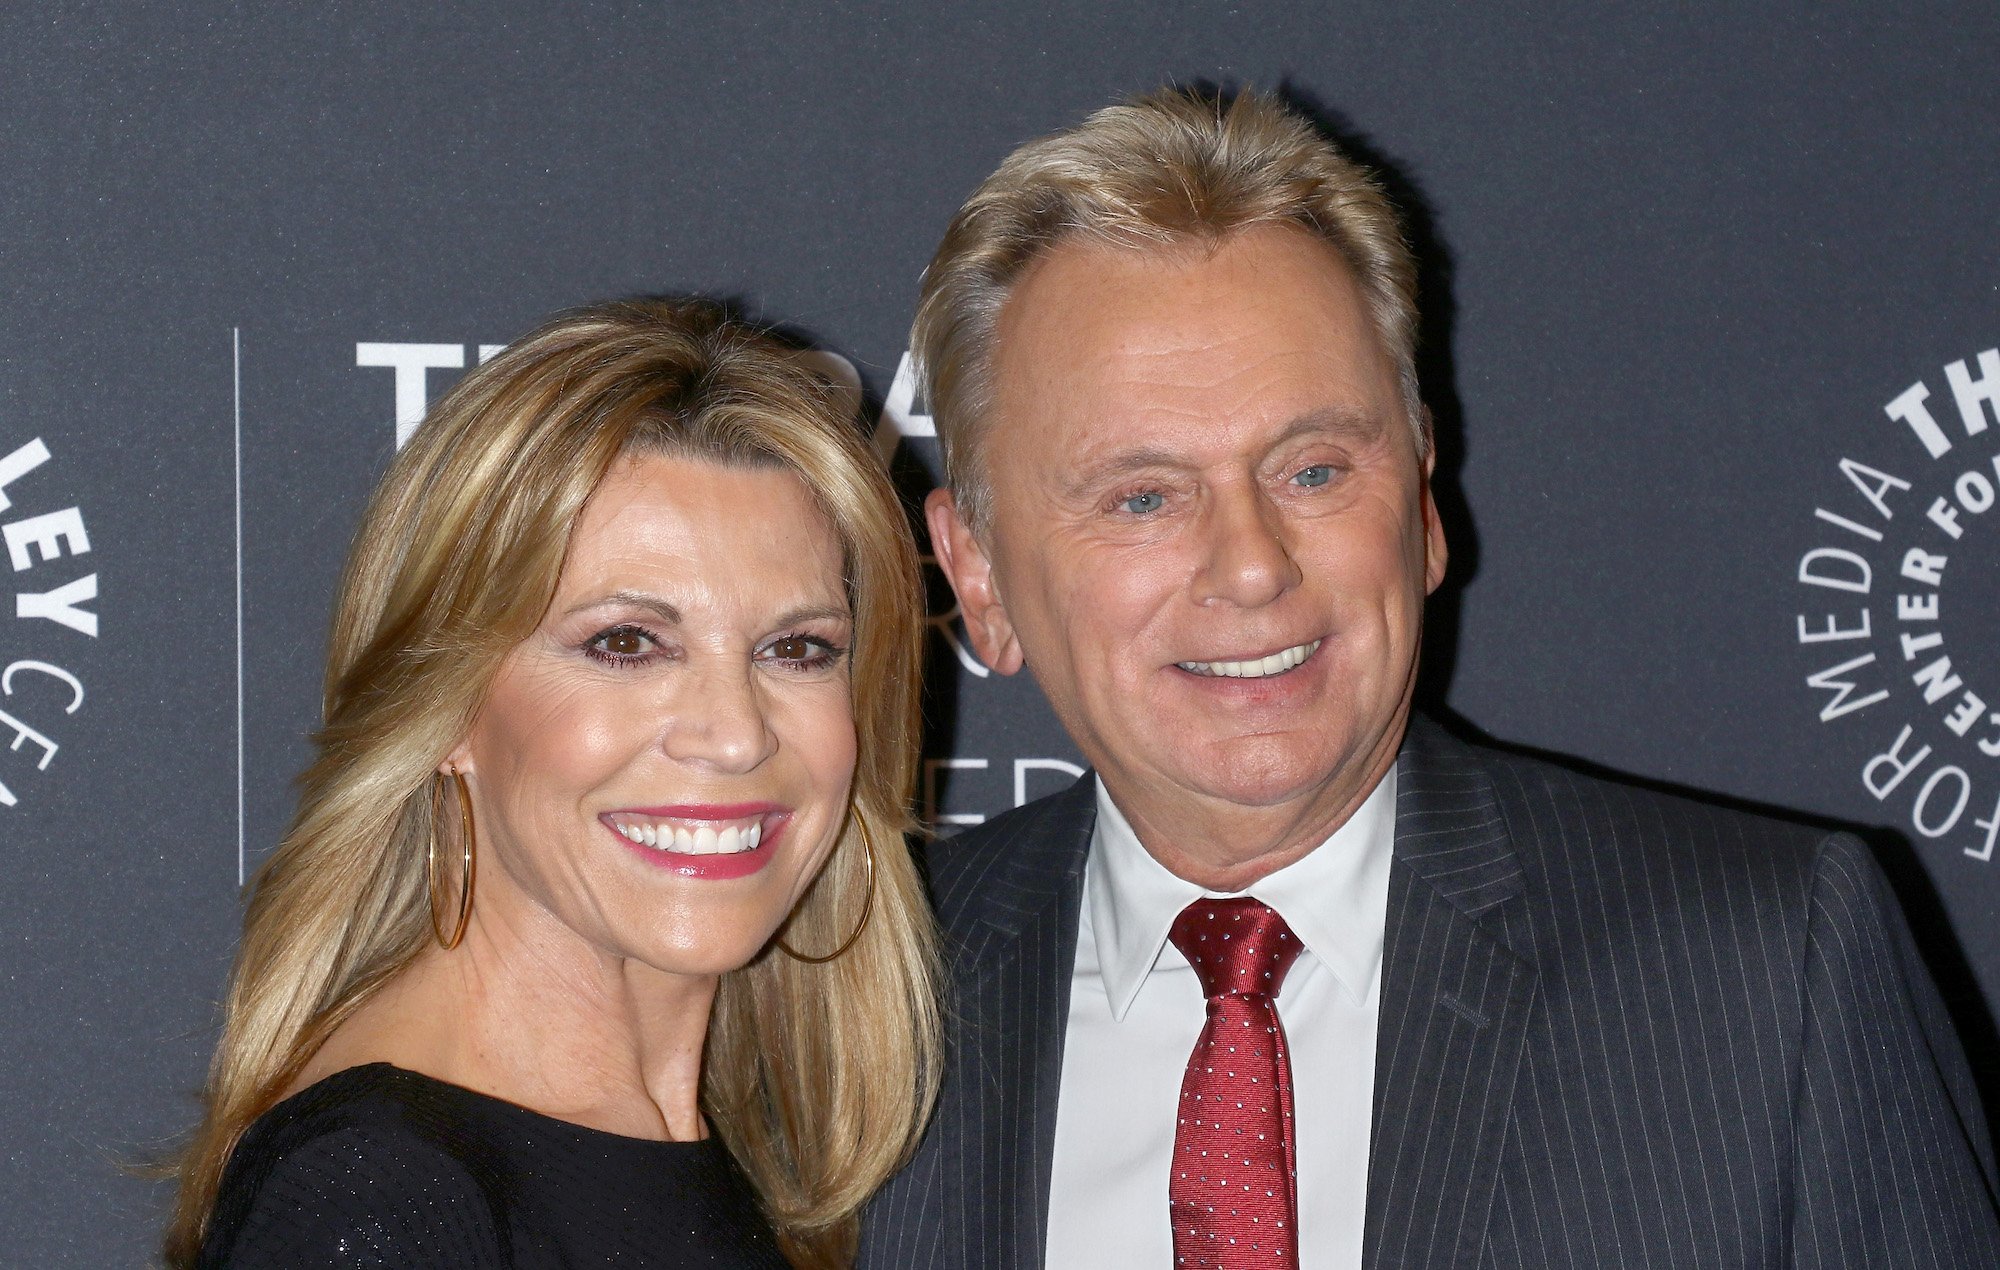 ‘Wheel of Fortune’: Vanna White Only Had 1 Rehearsal Before Filling in for Pat Sajak